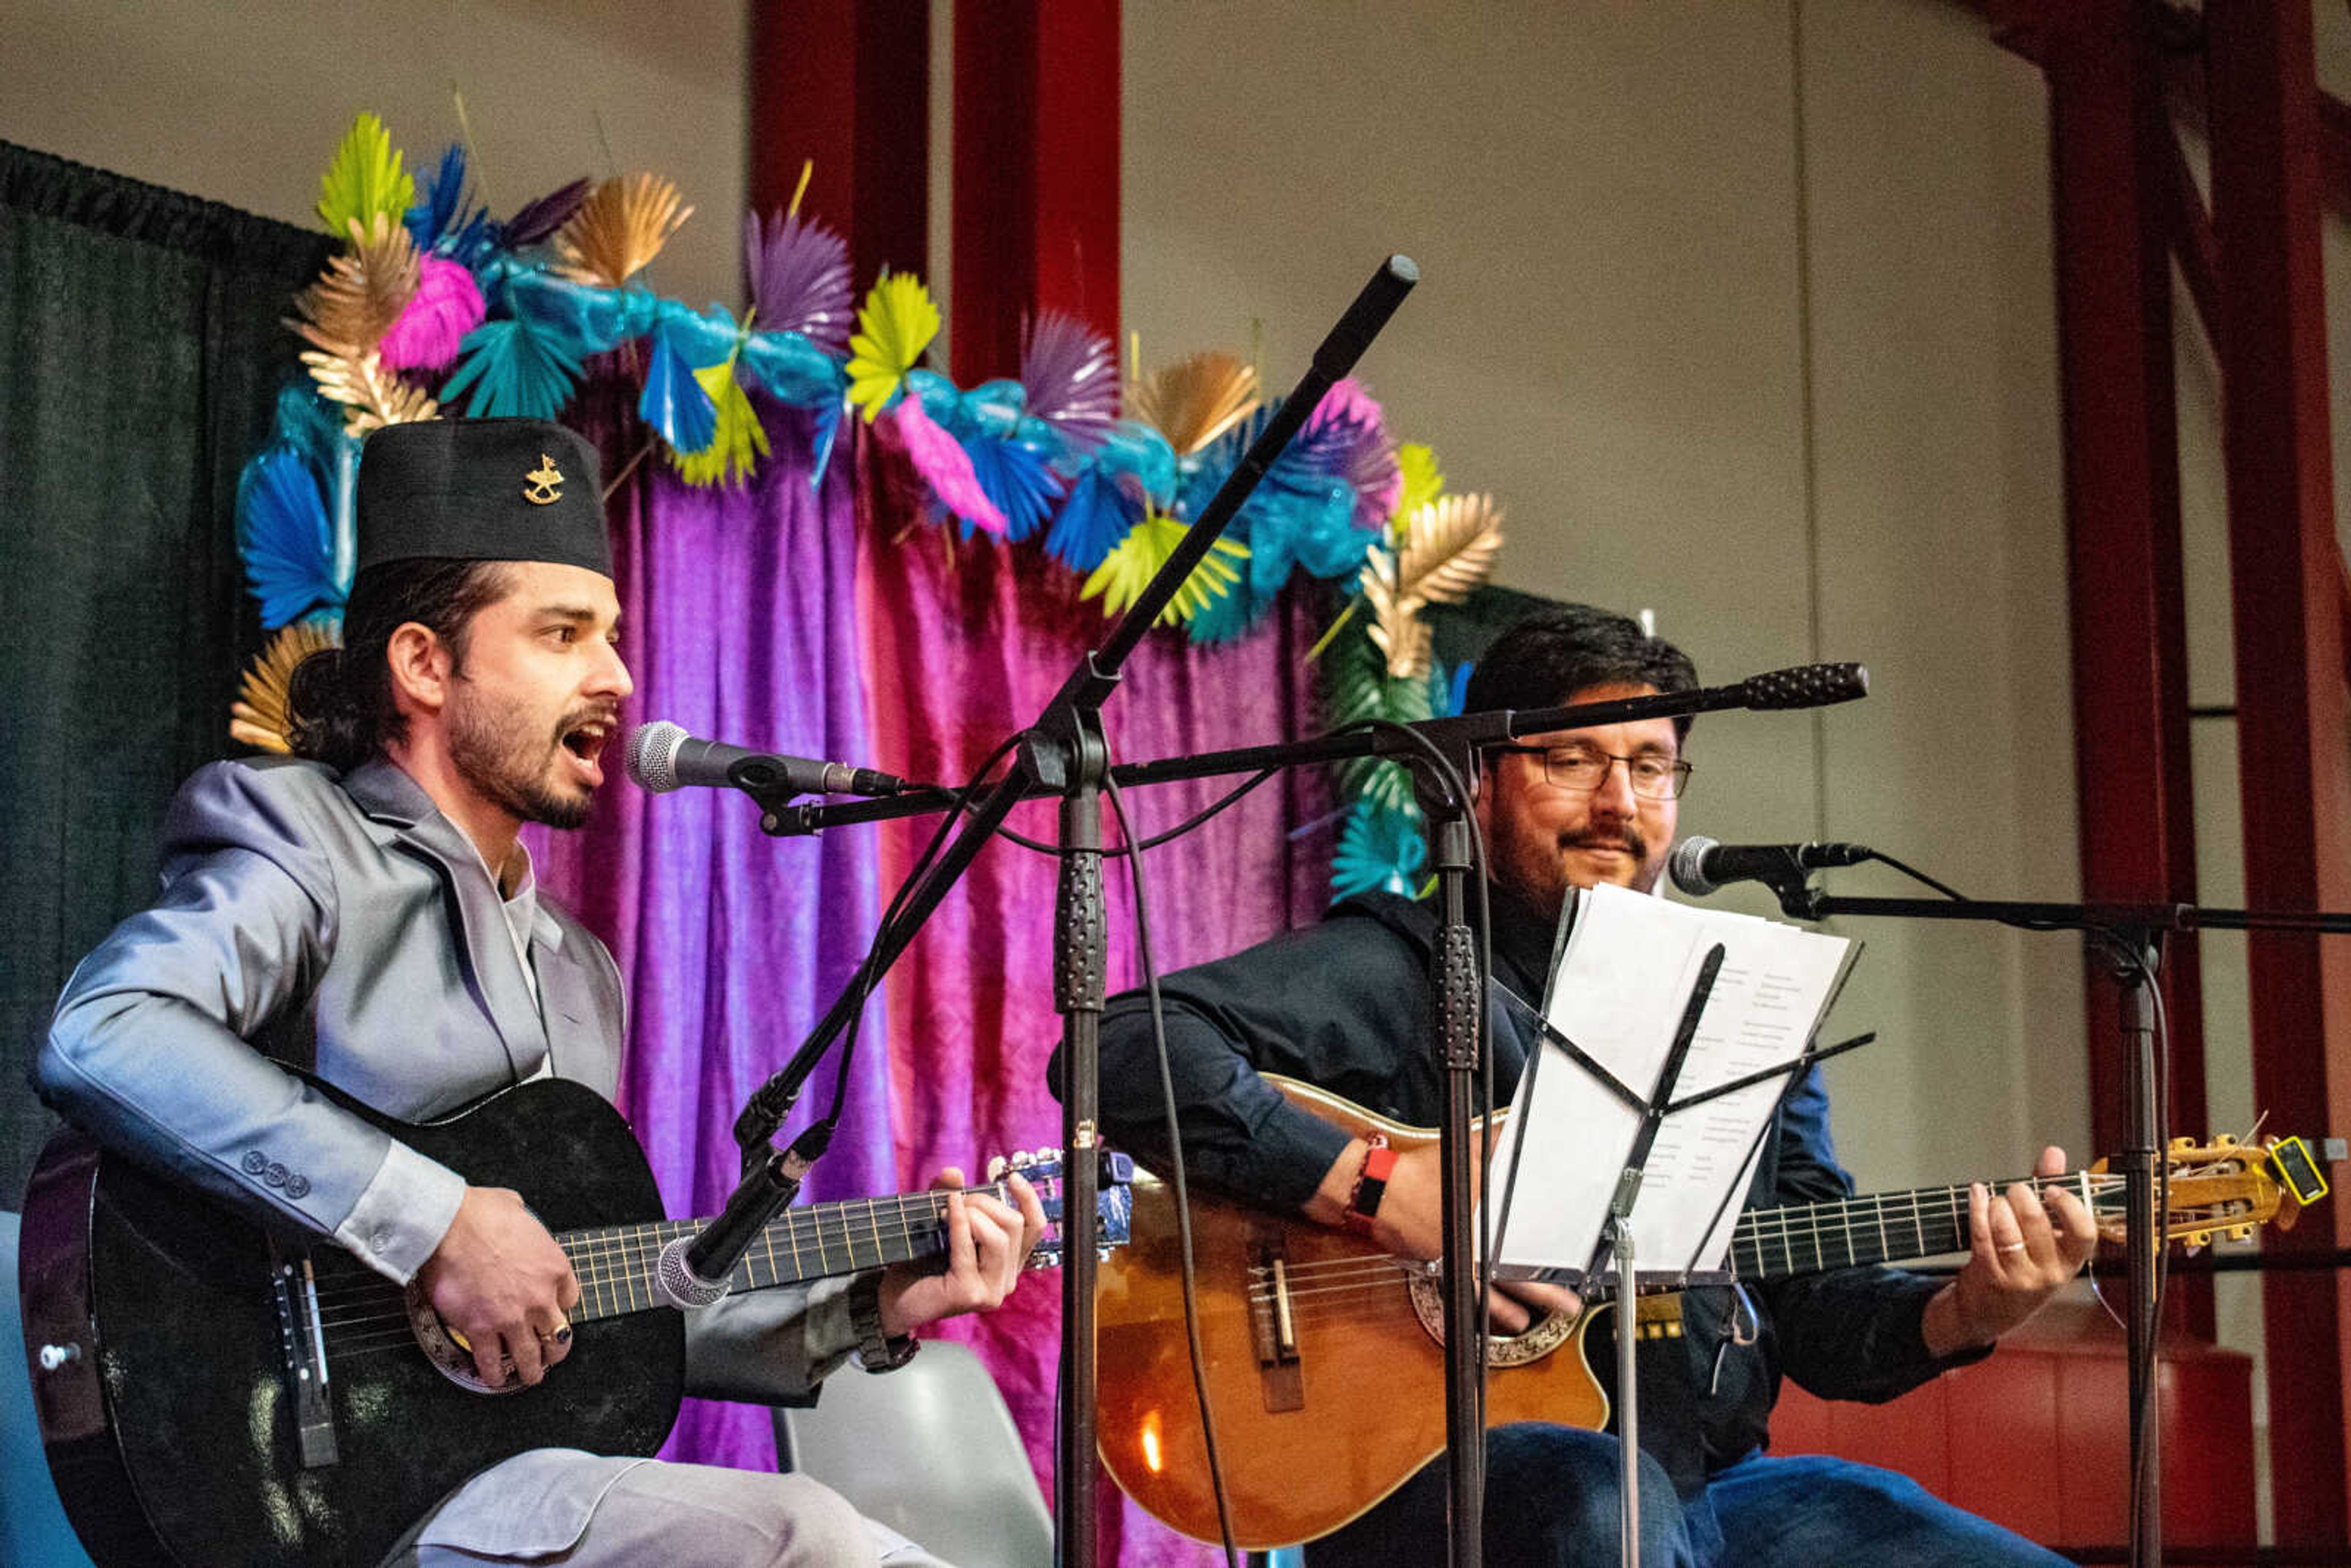 Guitar Duo Raj Prasai and Jose Andres Mińo Lara performing songs in Nepalese and Spanish in the Student Recreation Center, Saturday, Nov. 16.